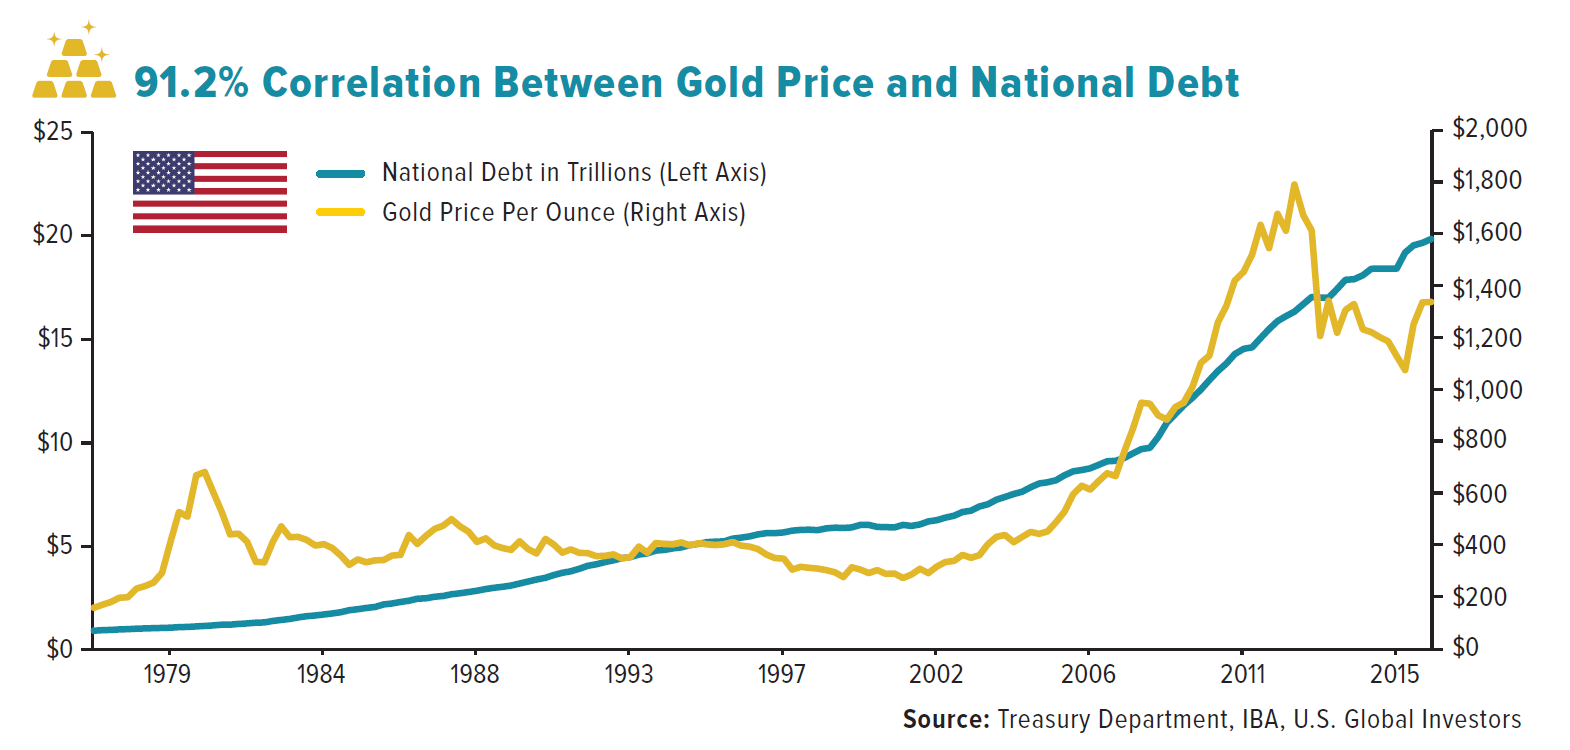 91.2% Correlation Between Gold Price and US National Debt